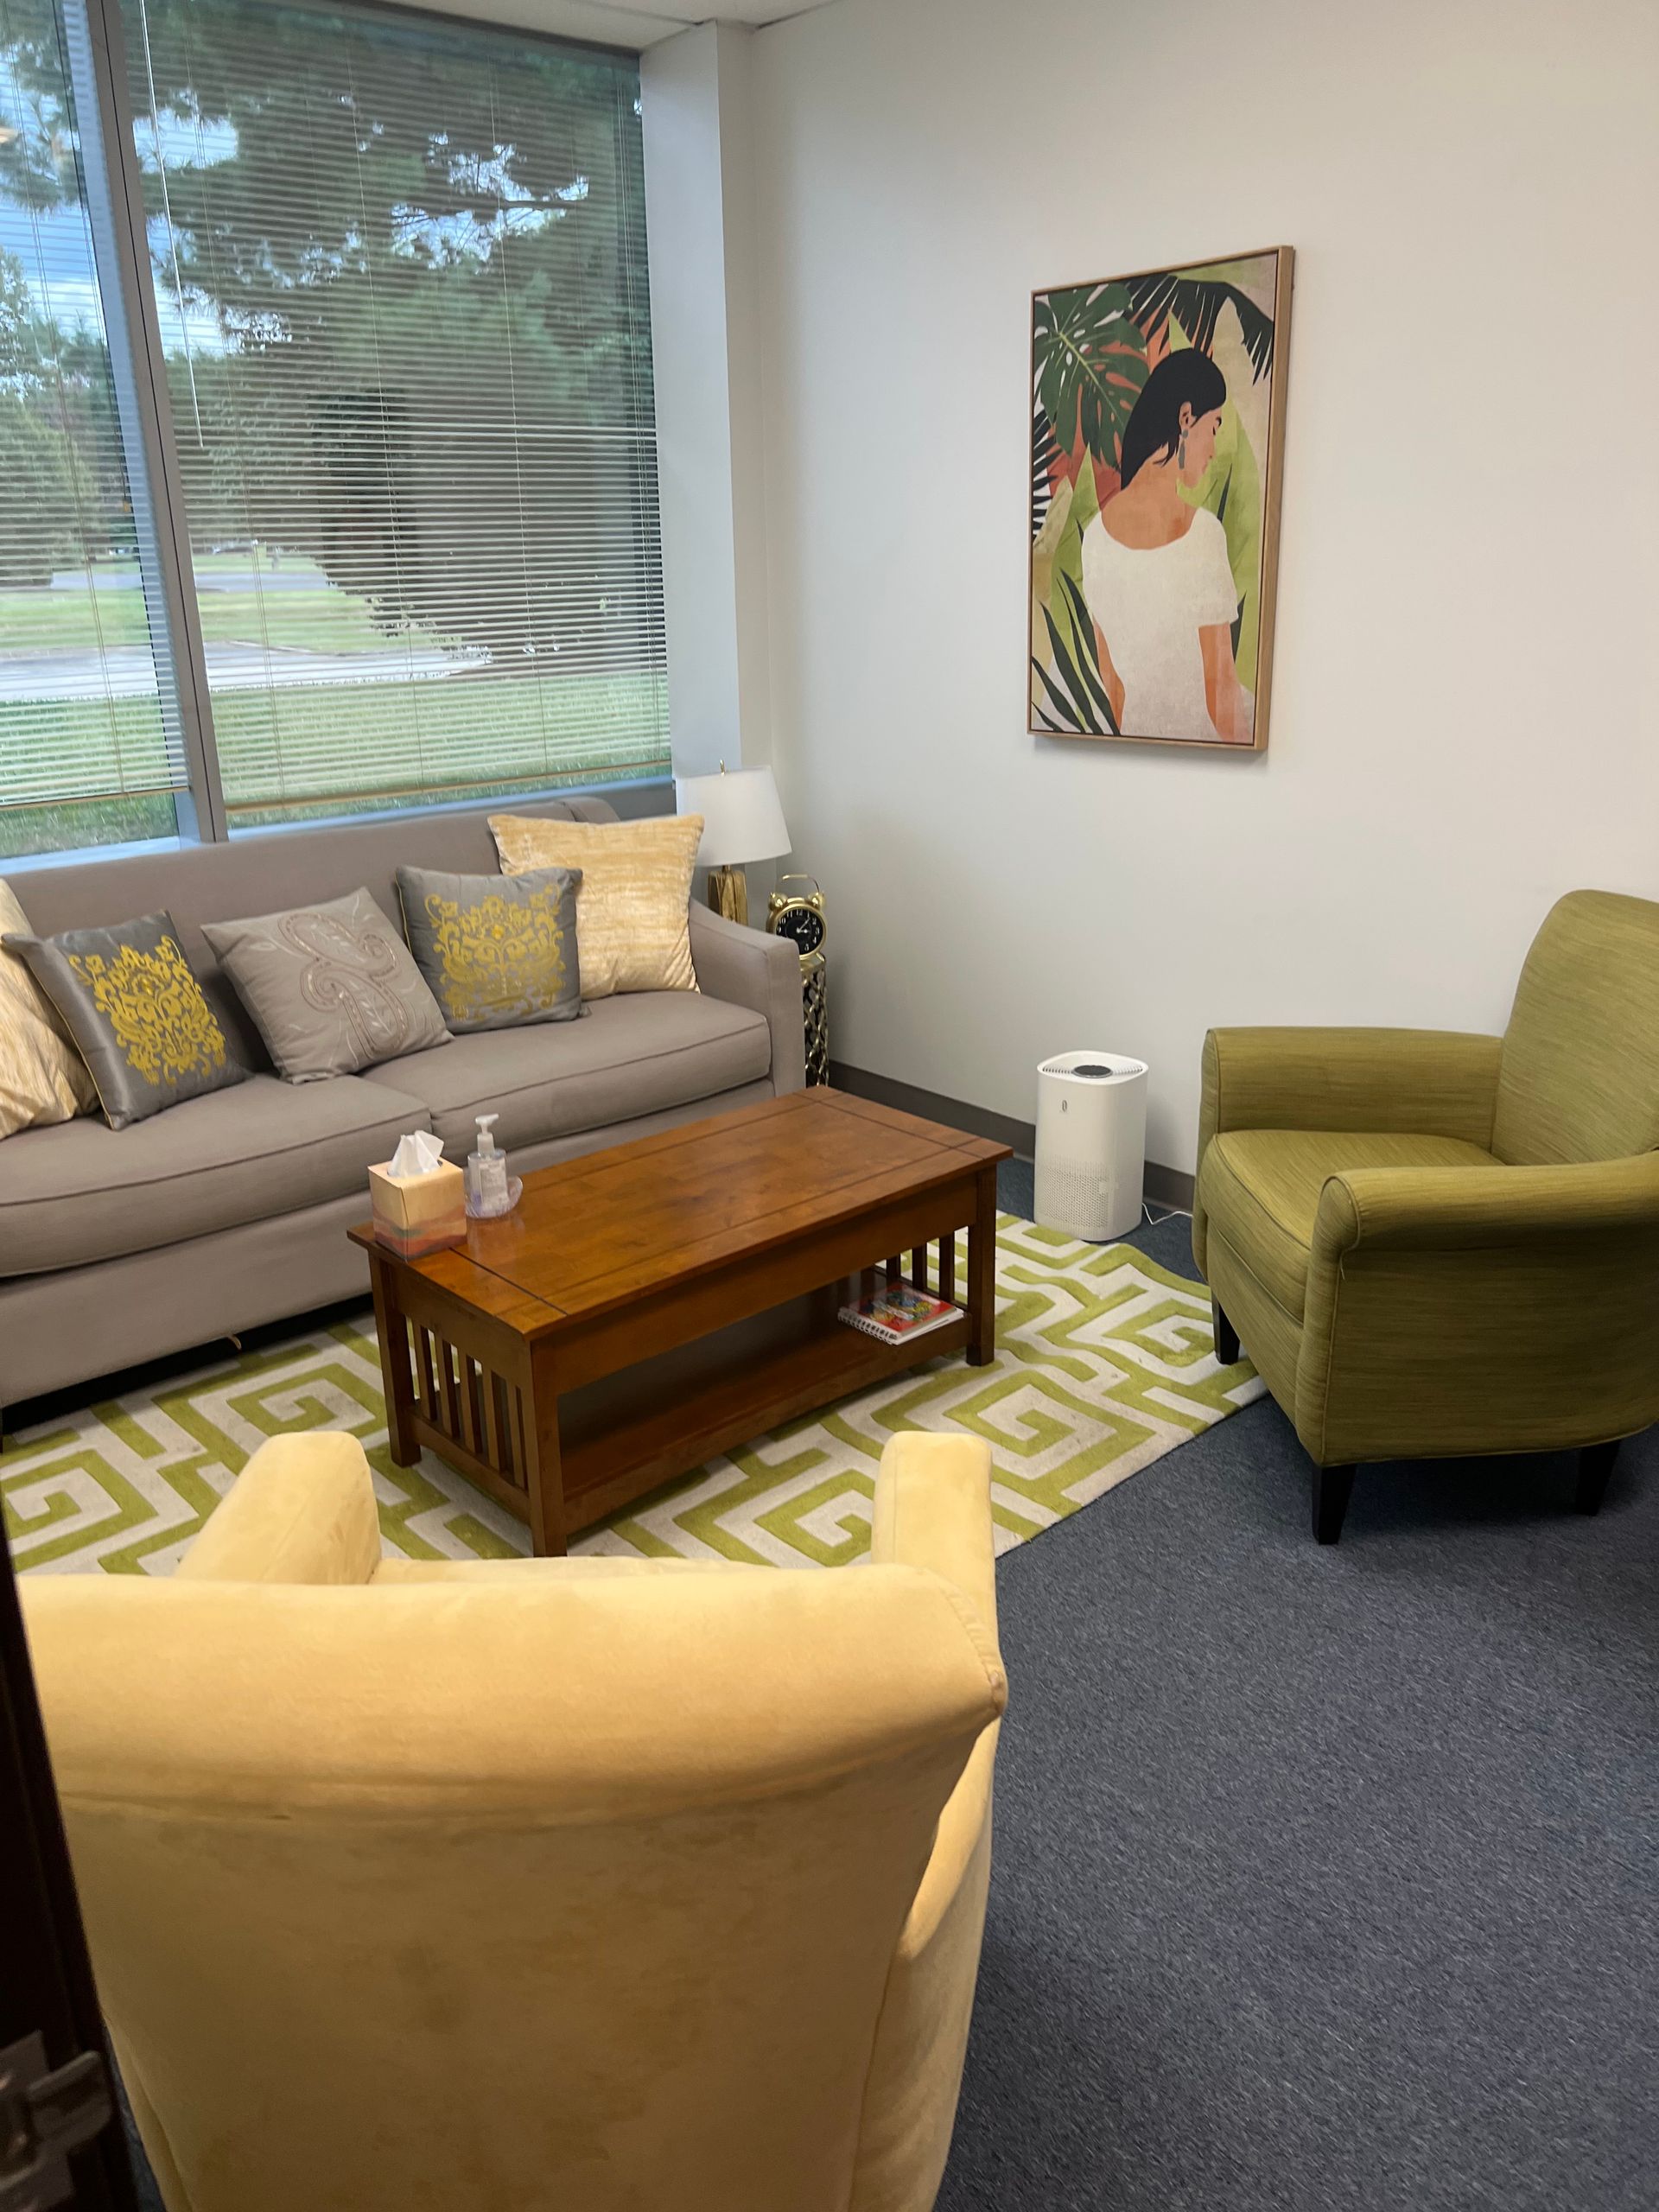 Counseling room